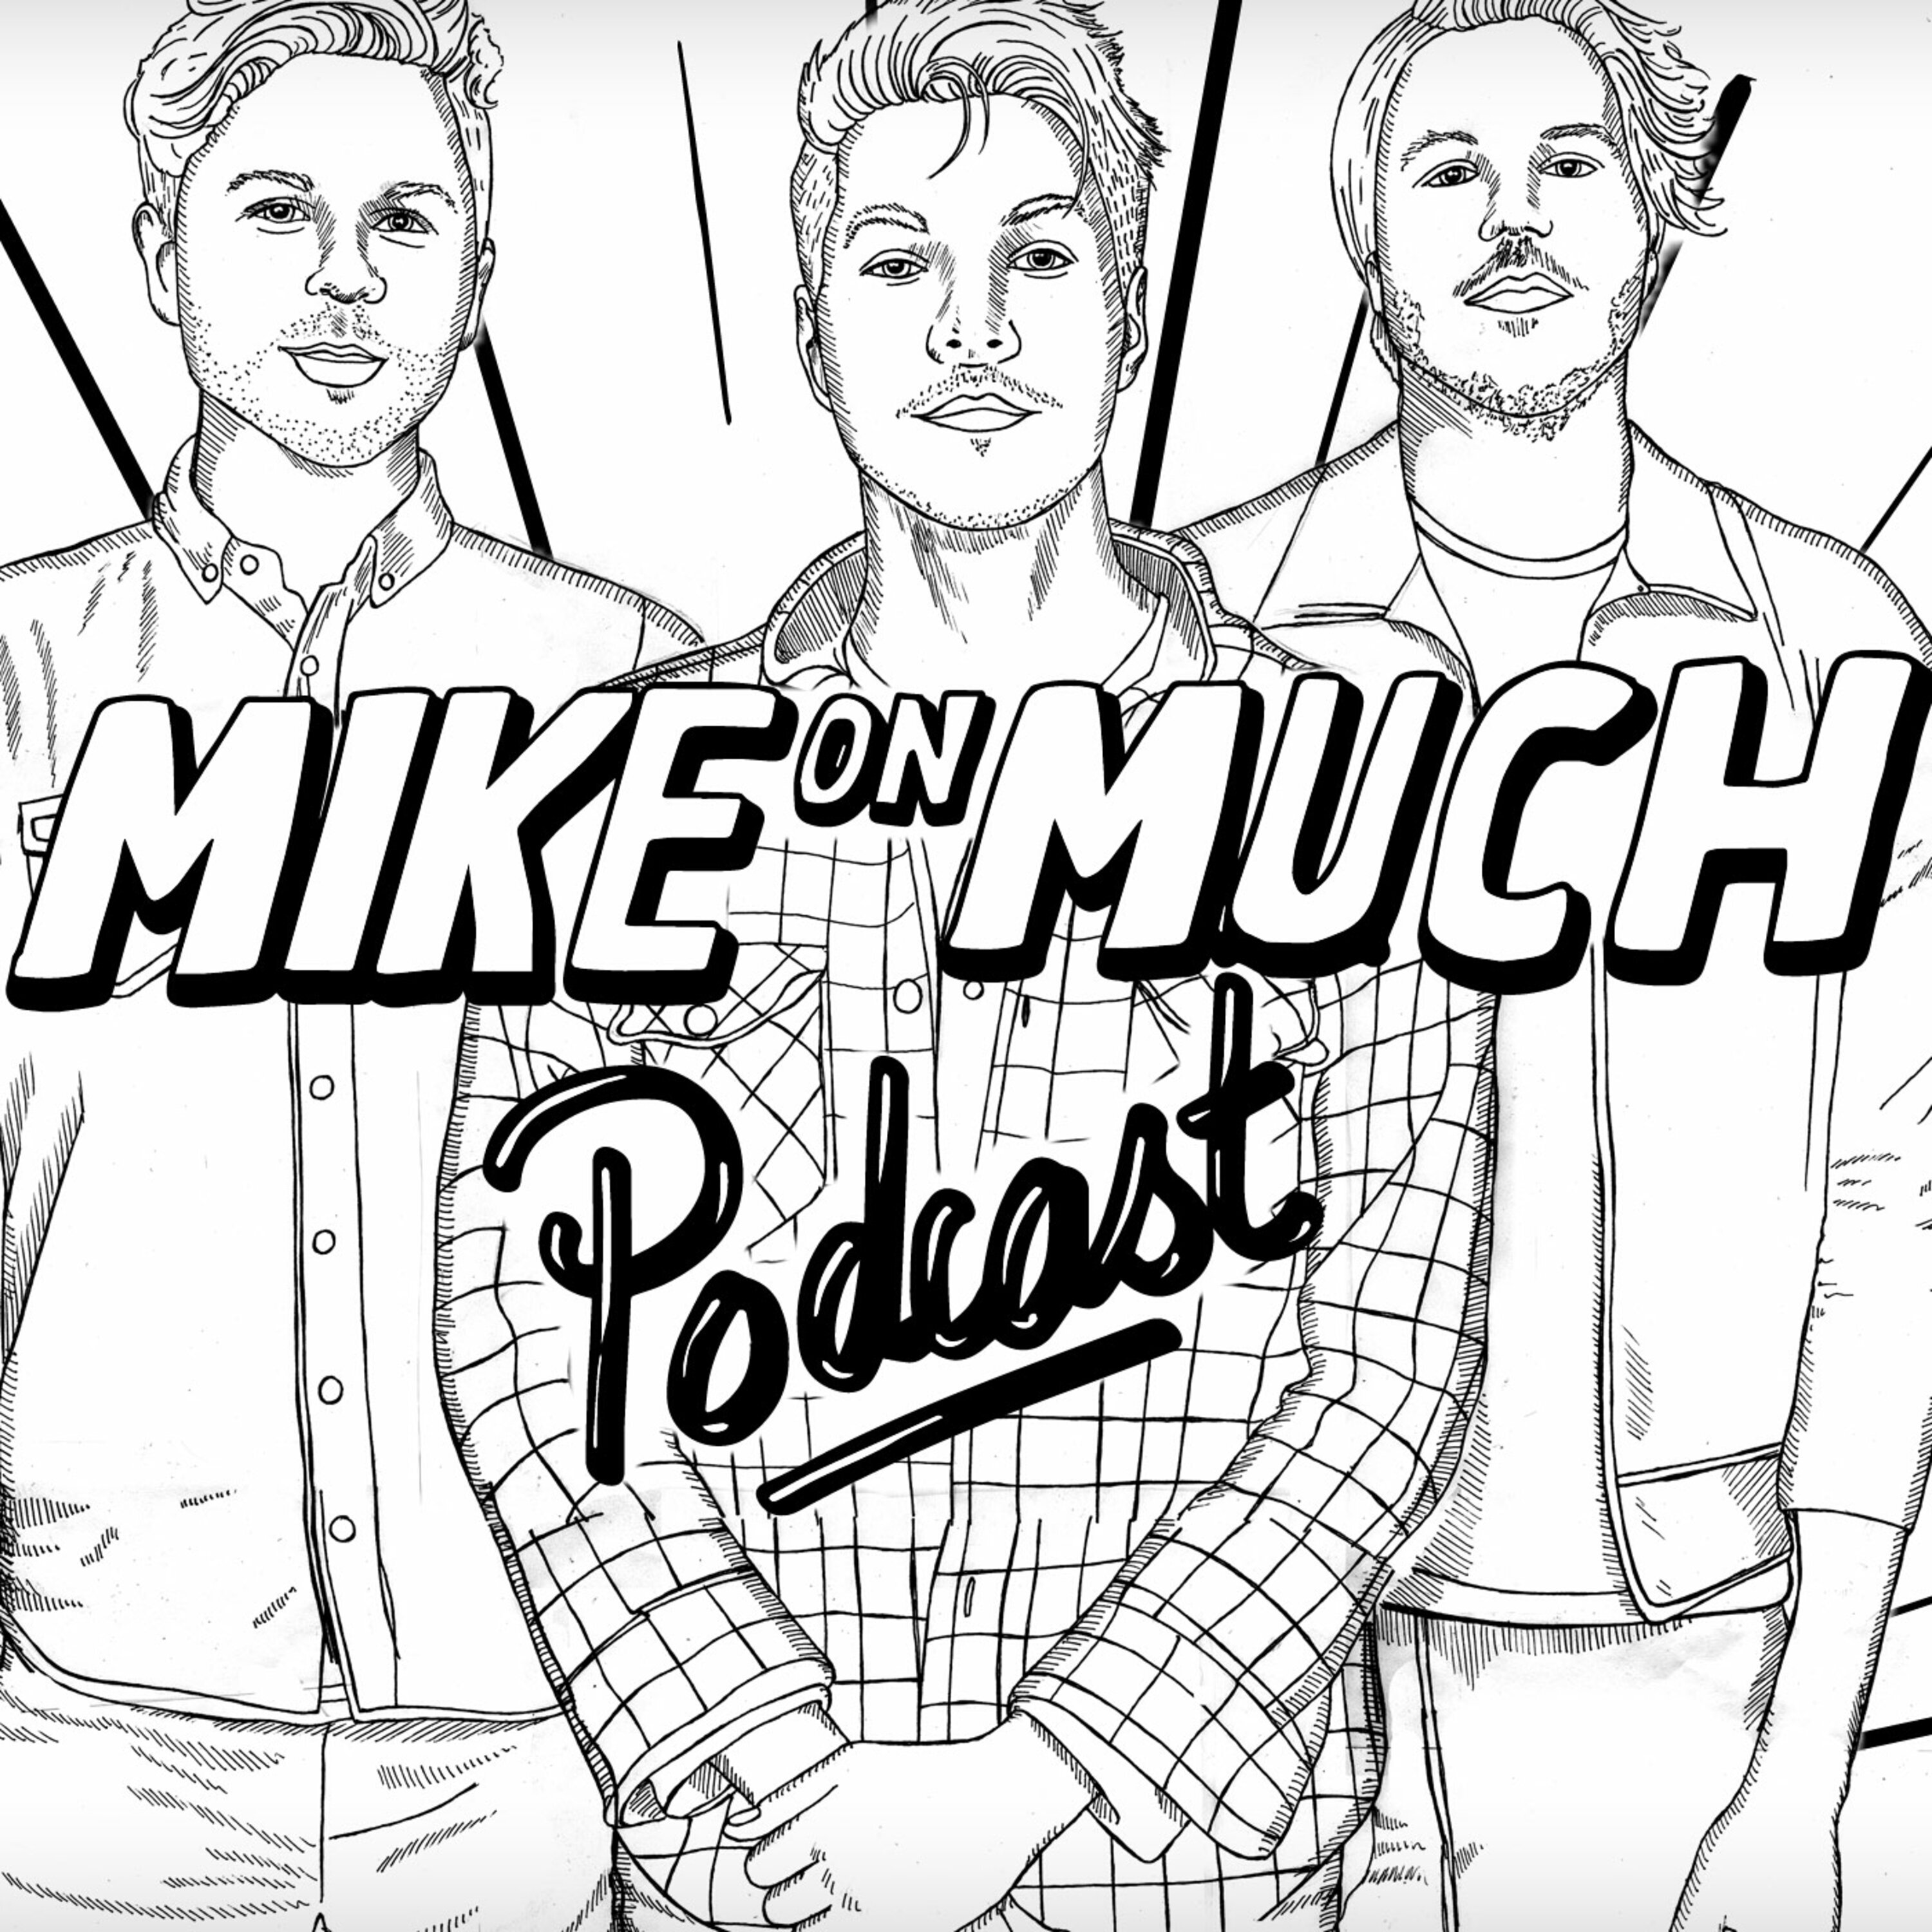 Season 1 Mike On Much: Tyler Johnston and Evan Stern from Letterkenny